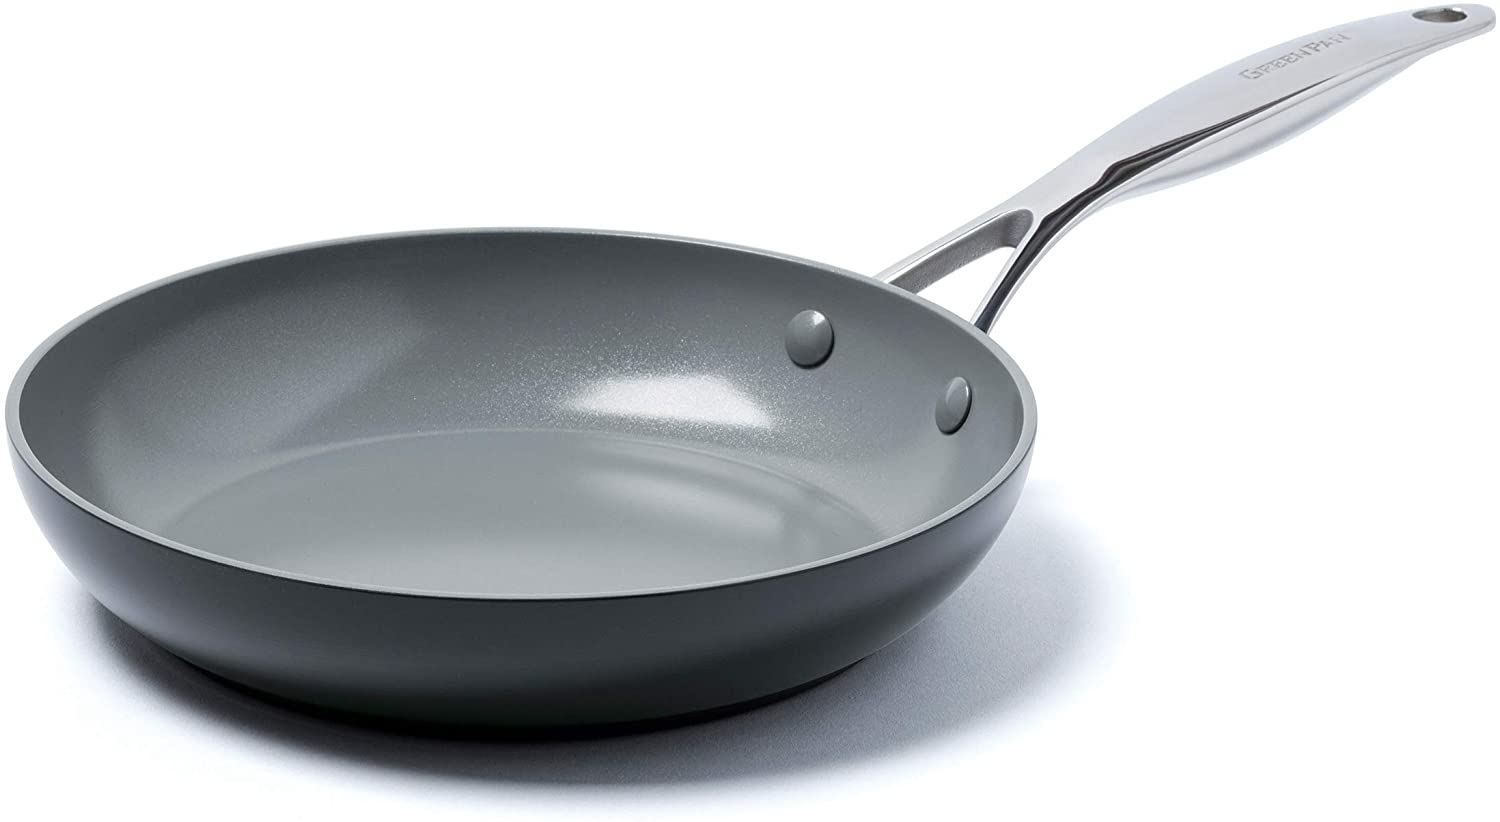 GreenPan Valencia Pro Nonstick Pan Reviewed And Rated